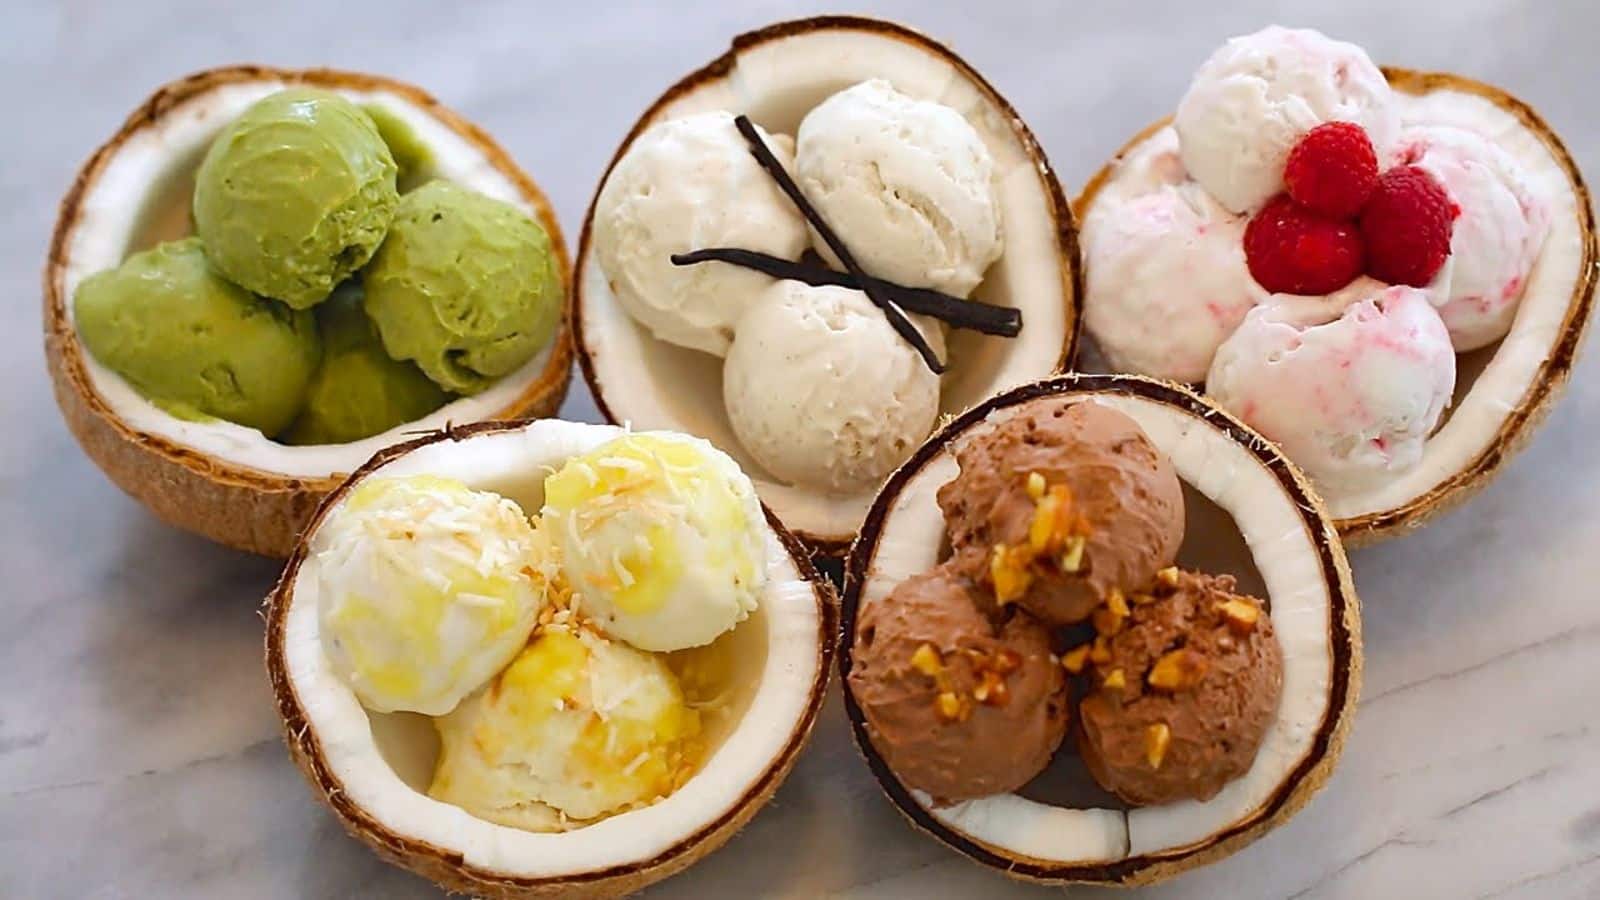 Indulge in these delicious vegan ice creams